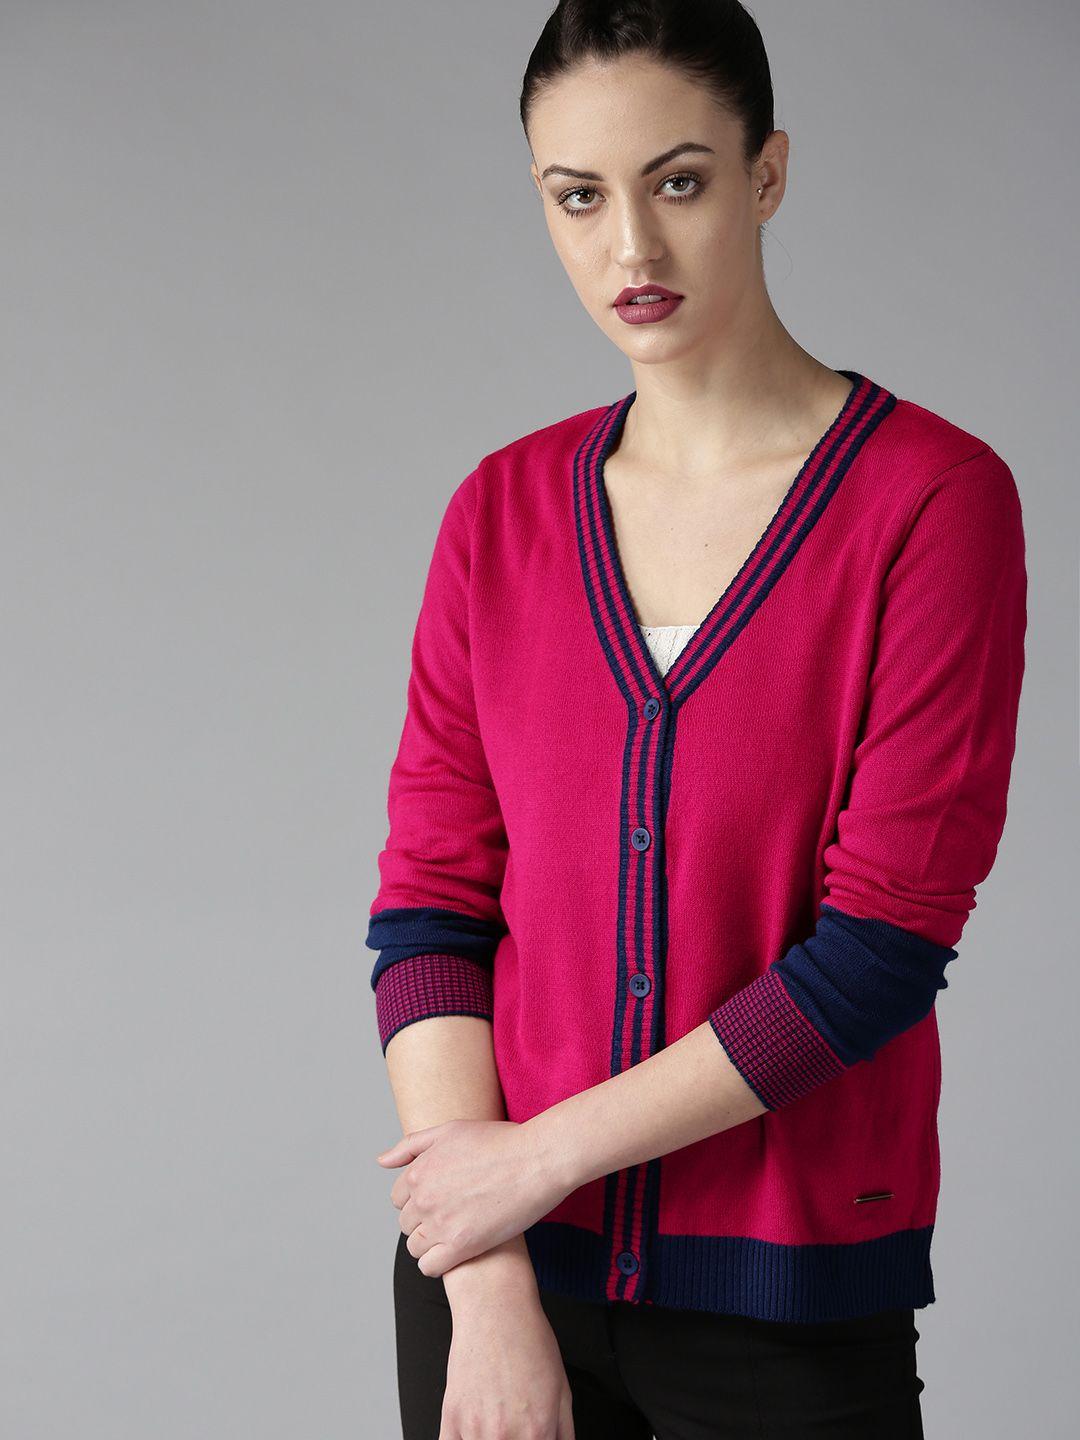 the-roadster-lifestyle-co-women-pink-solid-cardigan